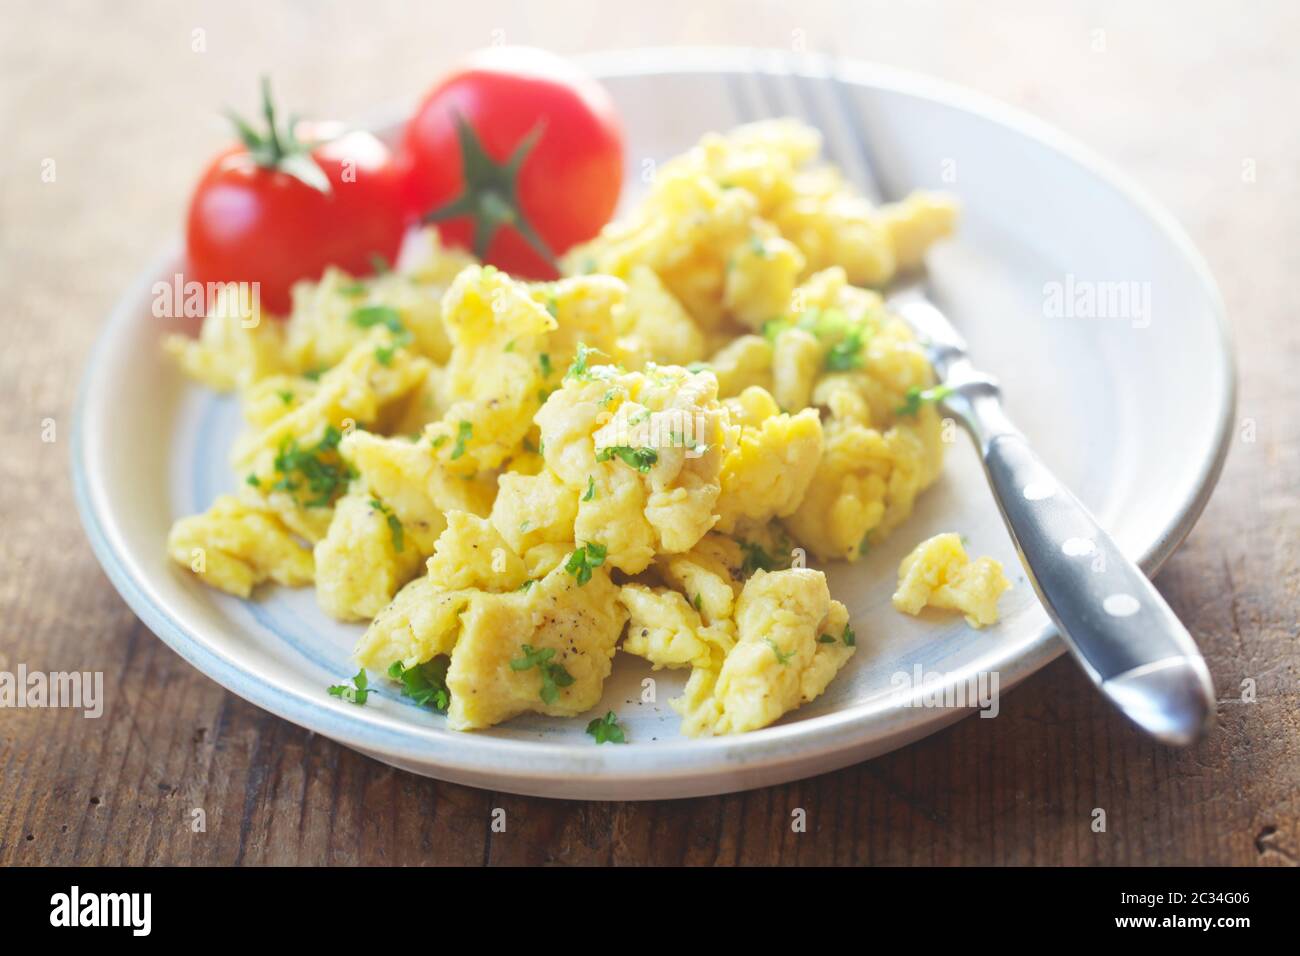 Scrambled Eggs With Tomatoes On A Plate Stock Photo